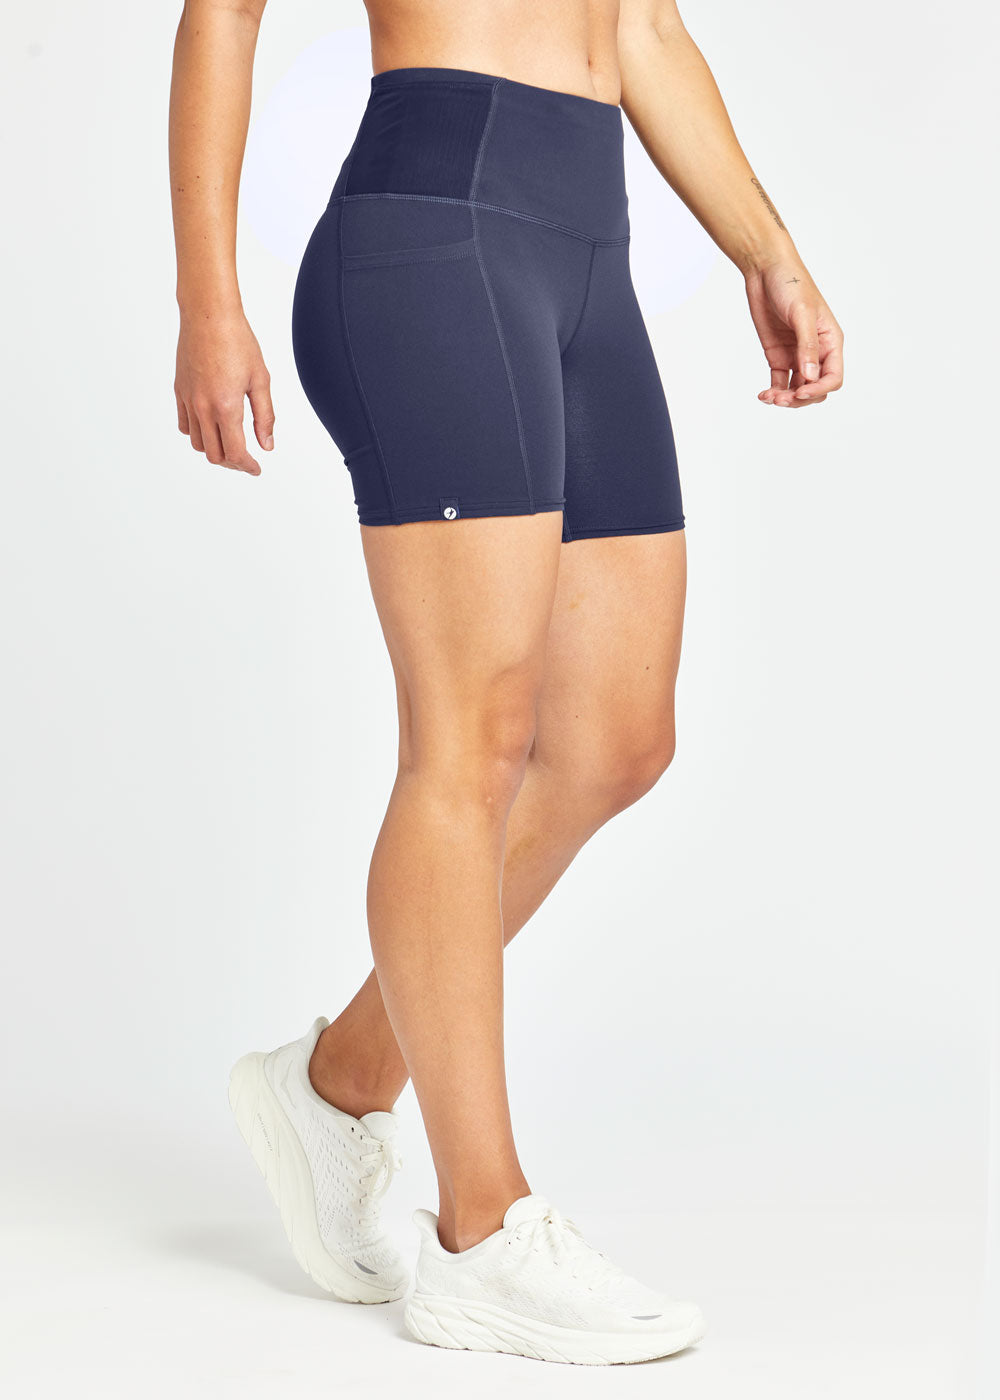 Fabletics Review (Read Before You Buy) - A Lily Love Affair